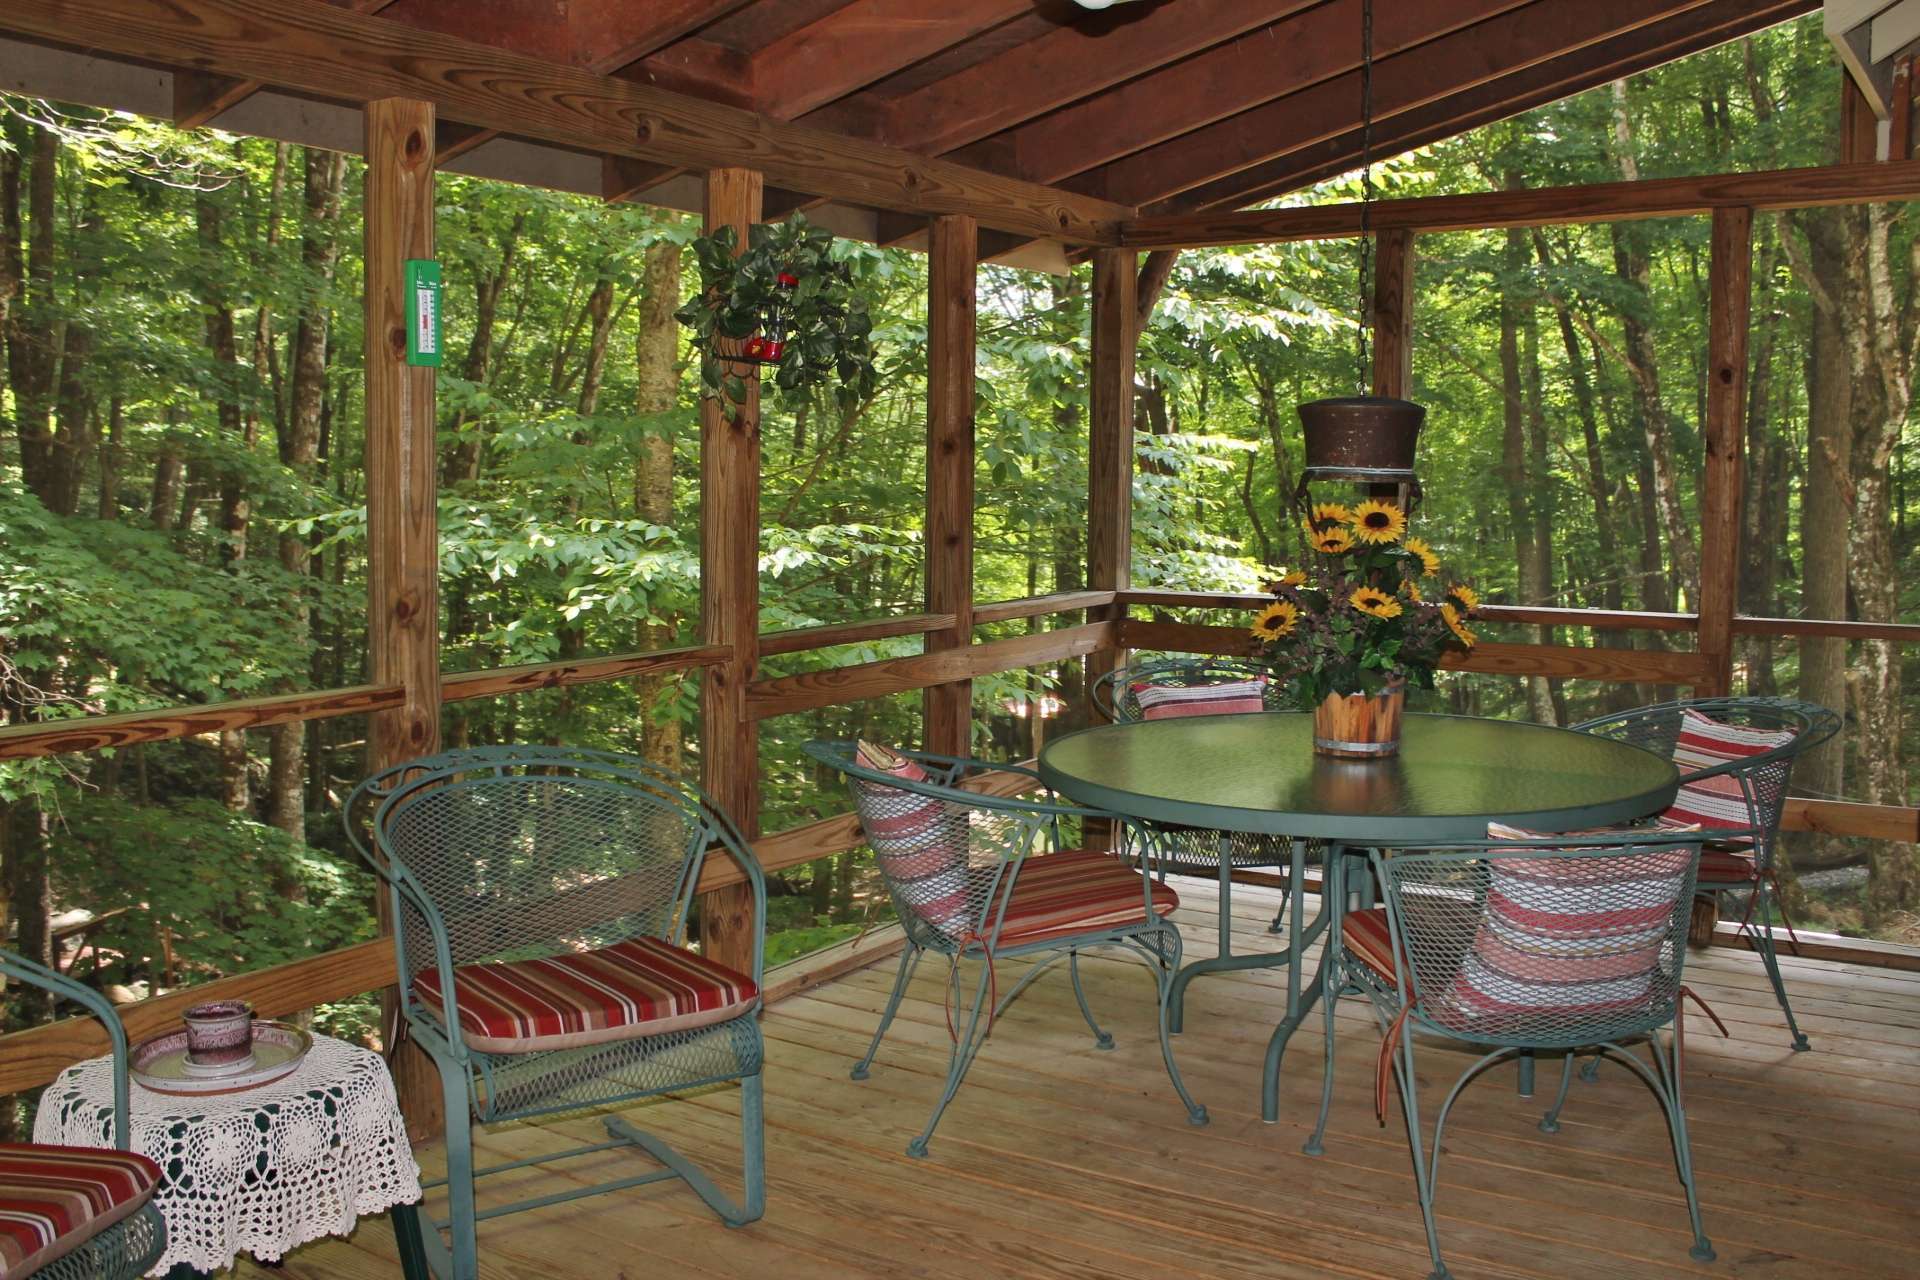 Or, take the meal outside to this covered and screened porch where you can enjoy fresh mountain air along with the sounds of Nature and the rushing creek.